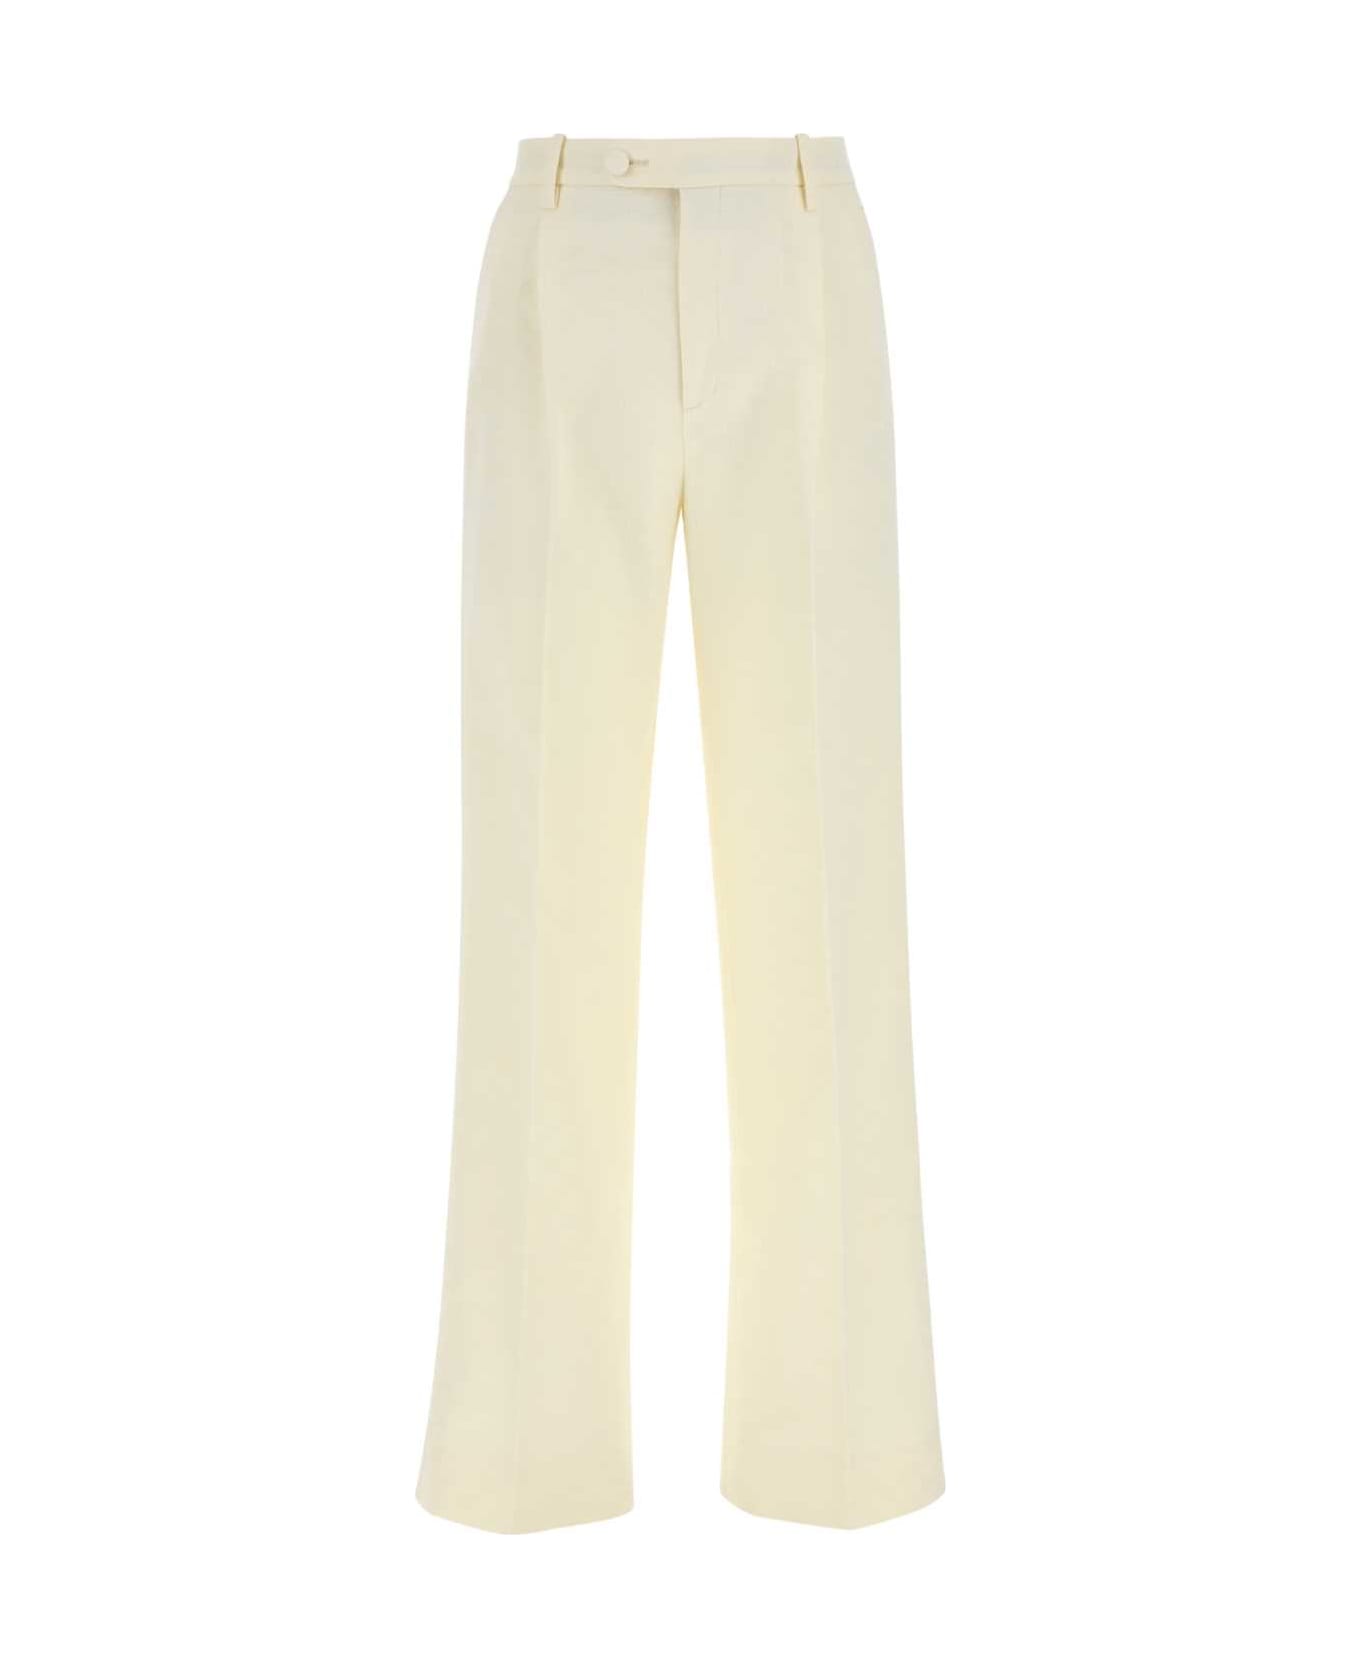 Gucci Embroidered Cotton Blend Wide-leg Pant - Beige ボトムス